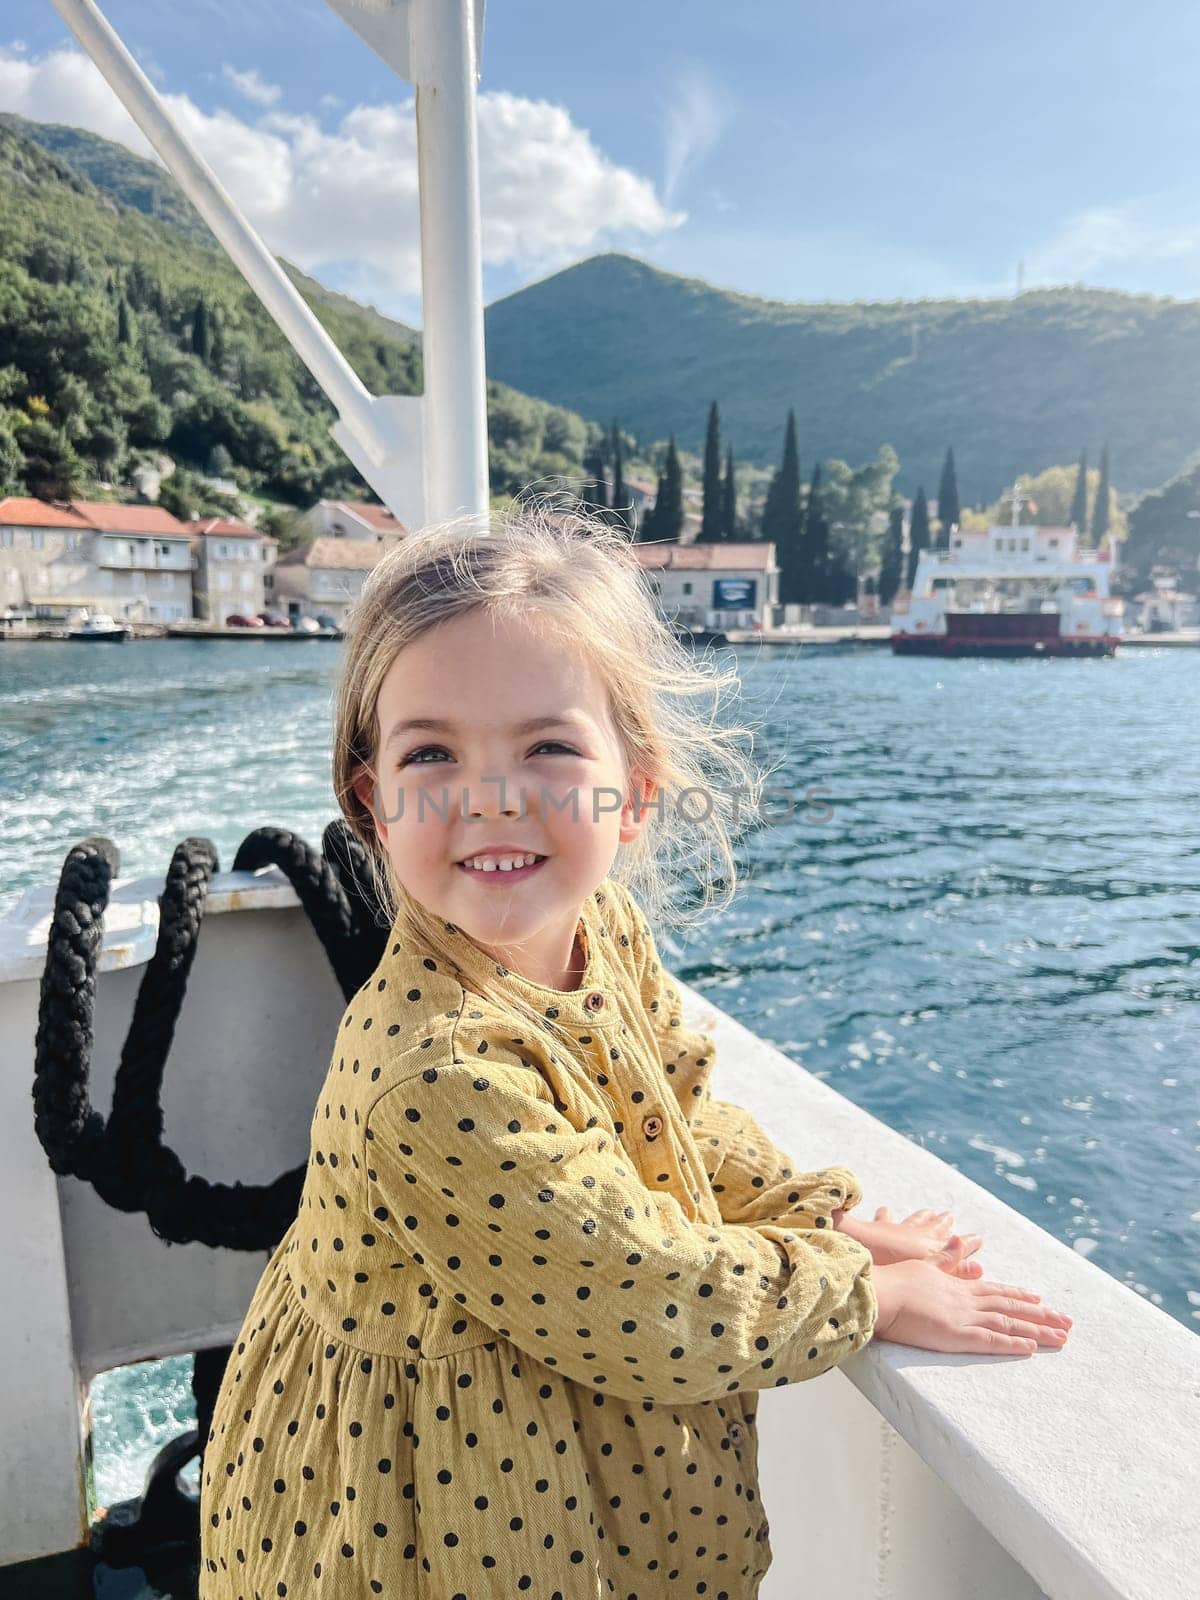 Little girl stands leaning on the side of a boat floating on the sea towards a mountainous shore. High quality photo